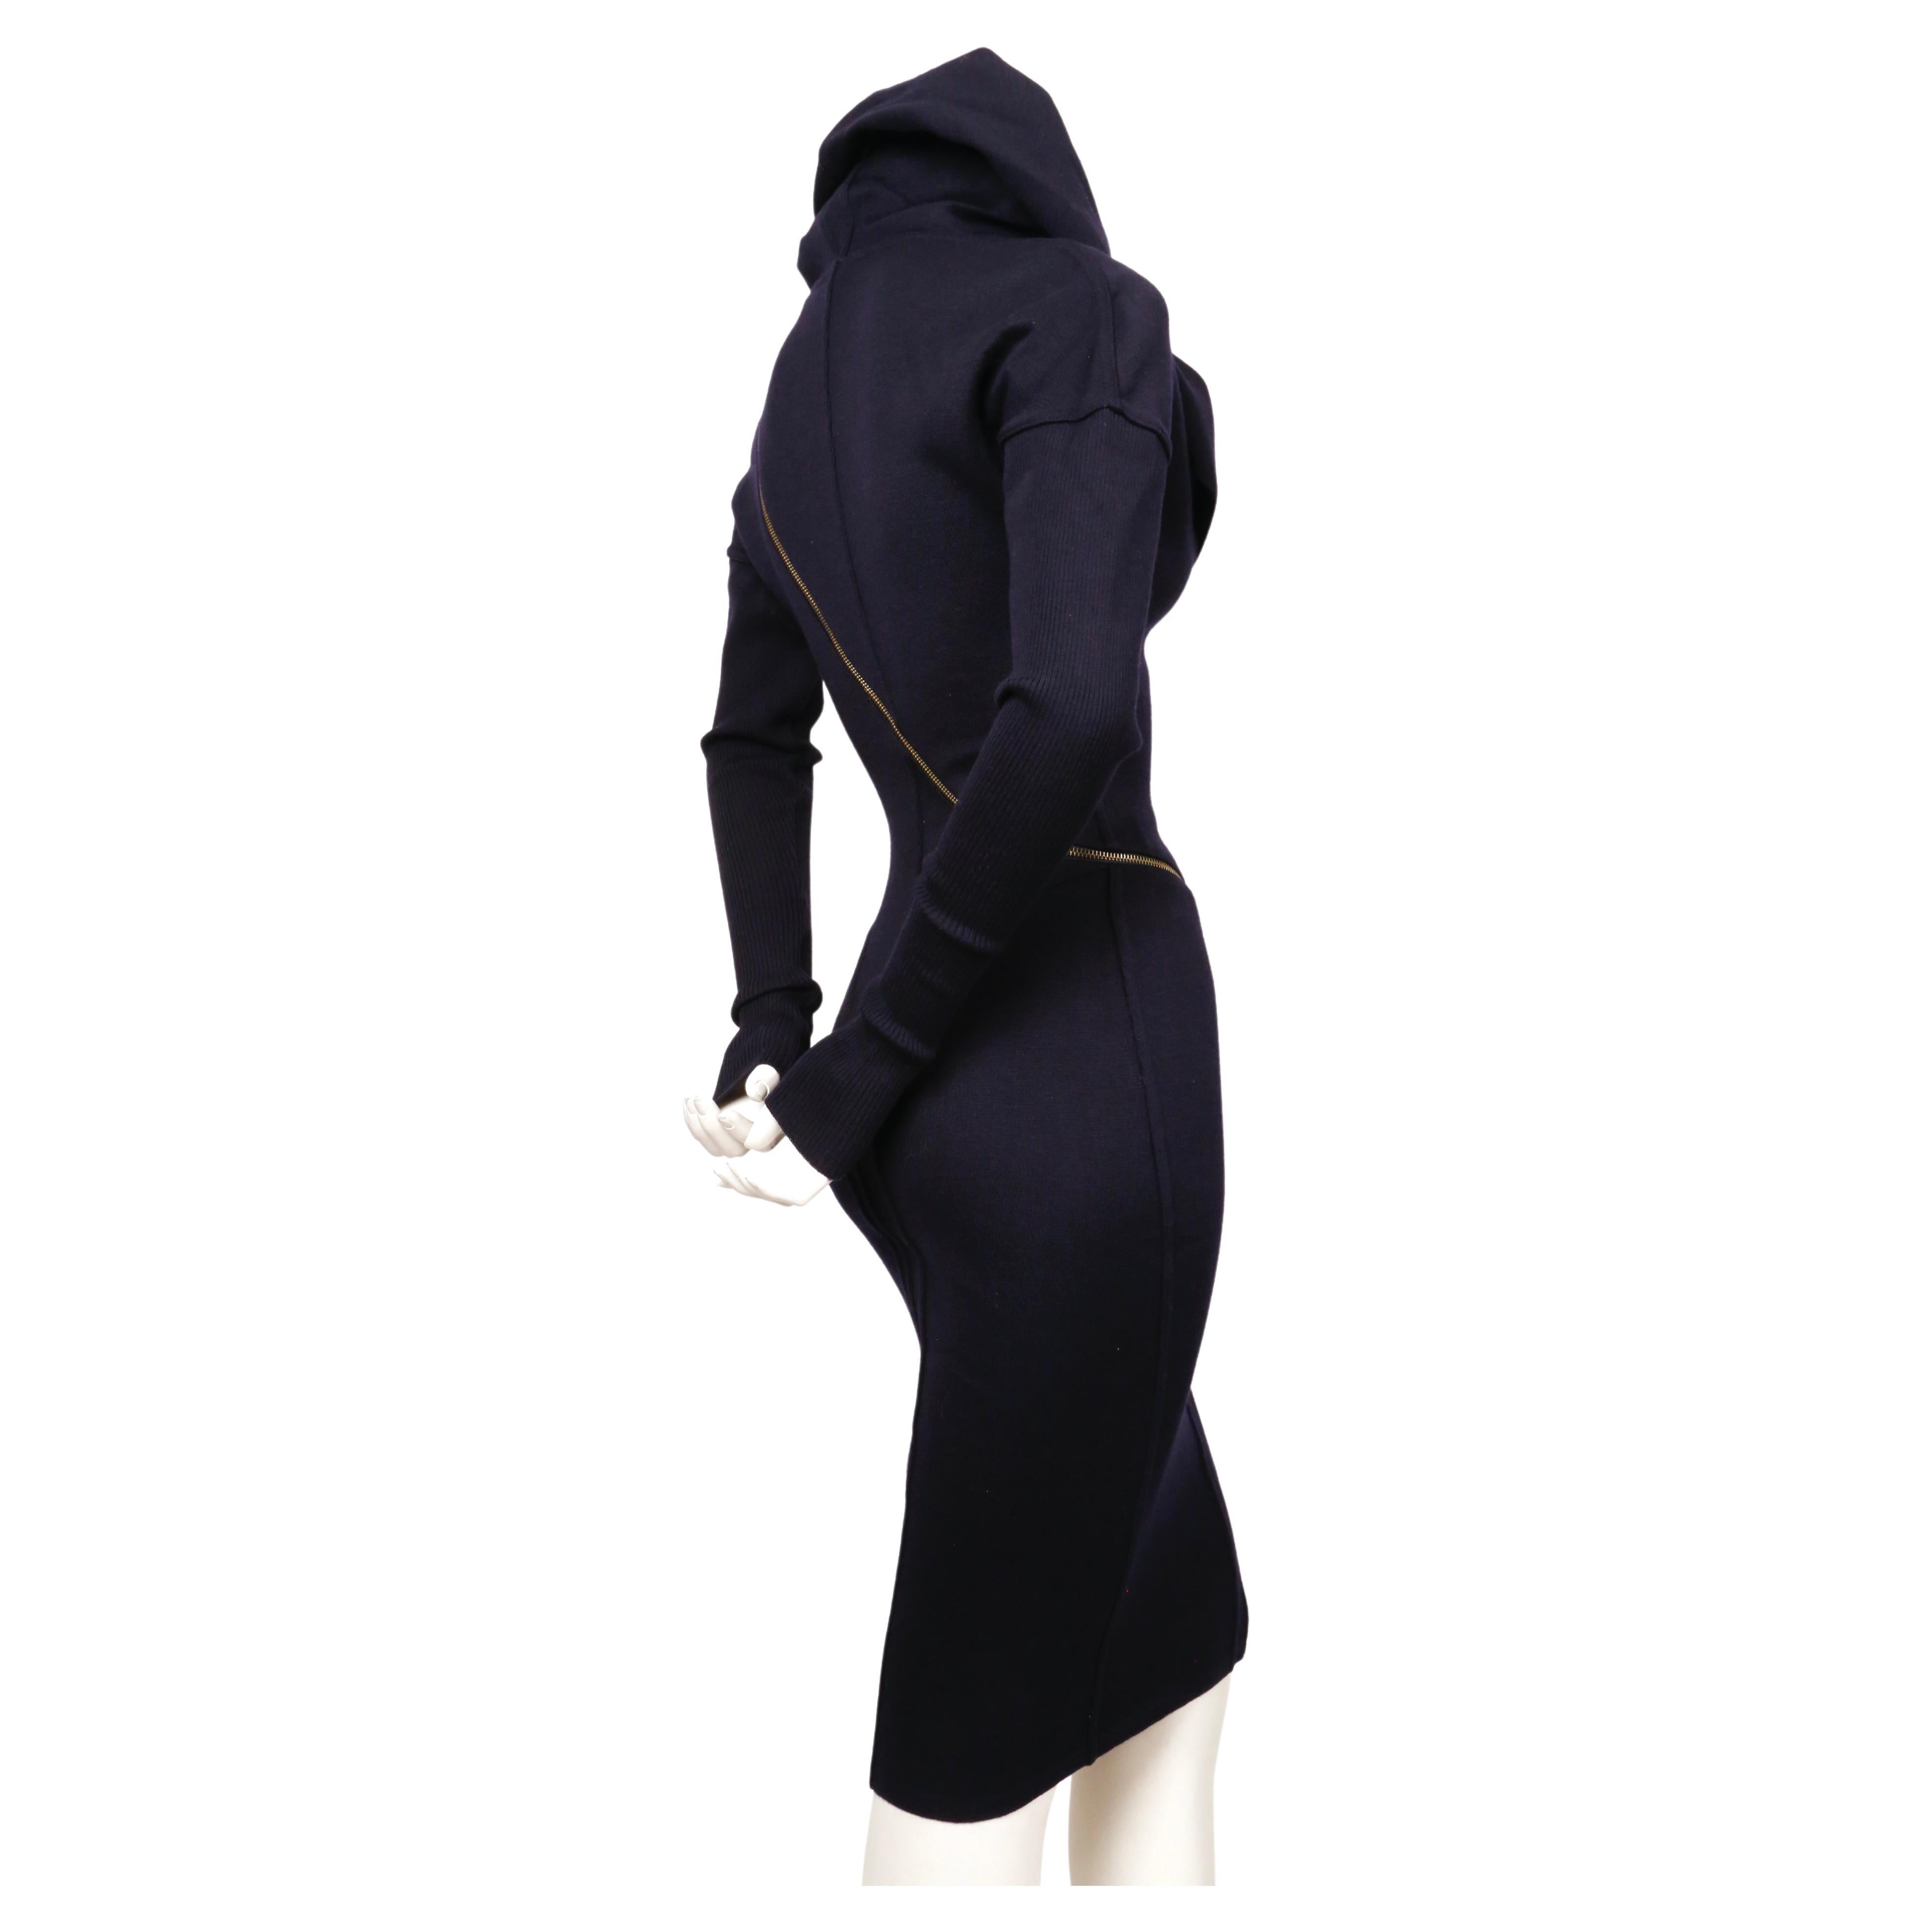 Iconic, navy blue wool, seamed, zipper dress with large hood designed by Azzedine Alaia dating to fall of 1986 as seen on the runway. Well documented piece. Very flattering seams with spiral zipper that cleverly follows the contours of dress seams.